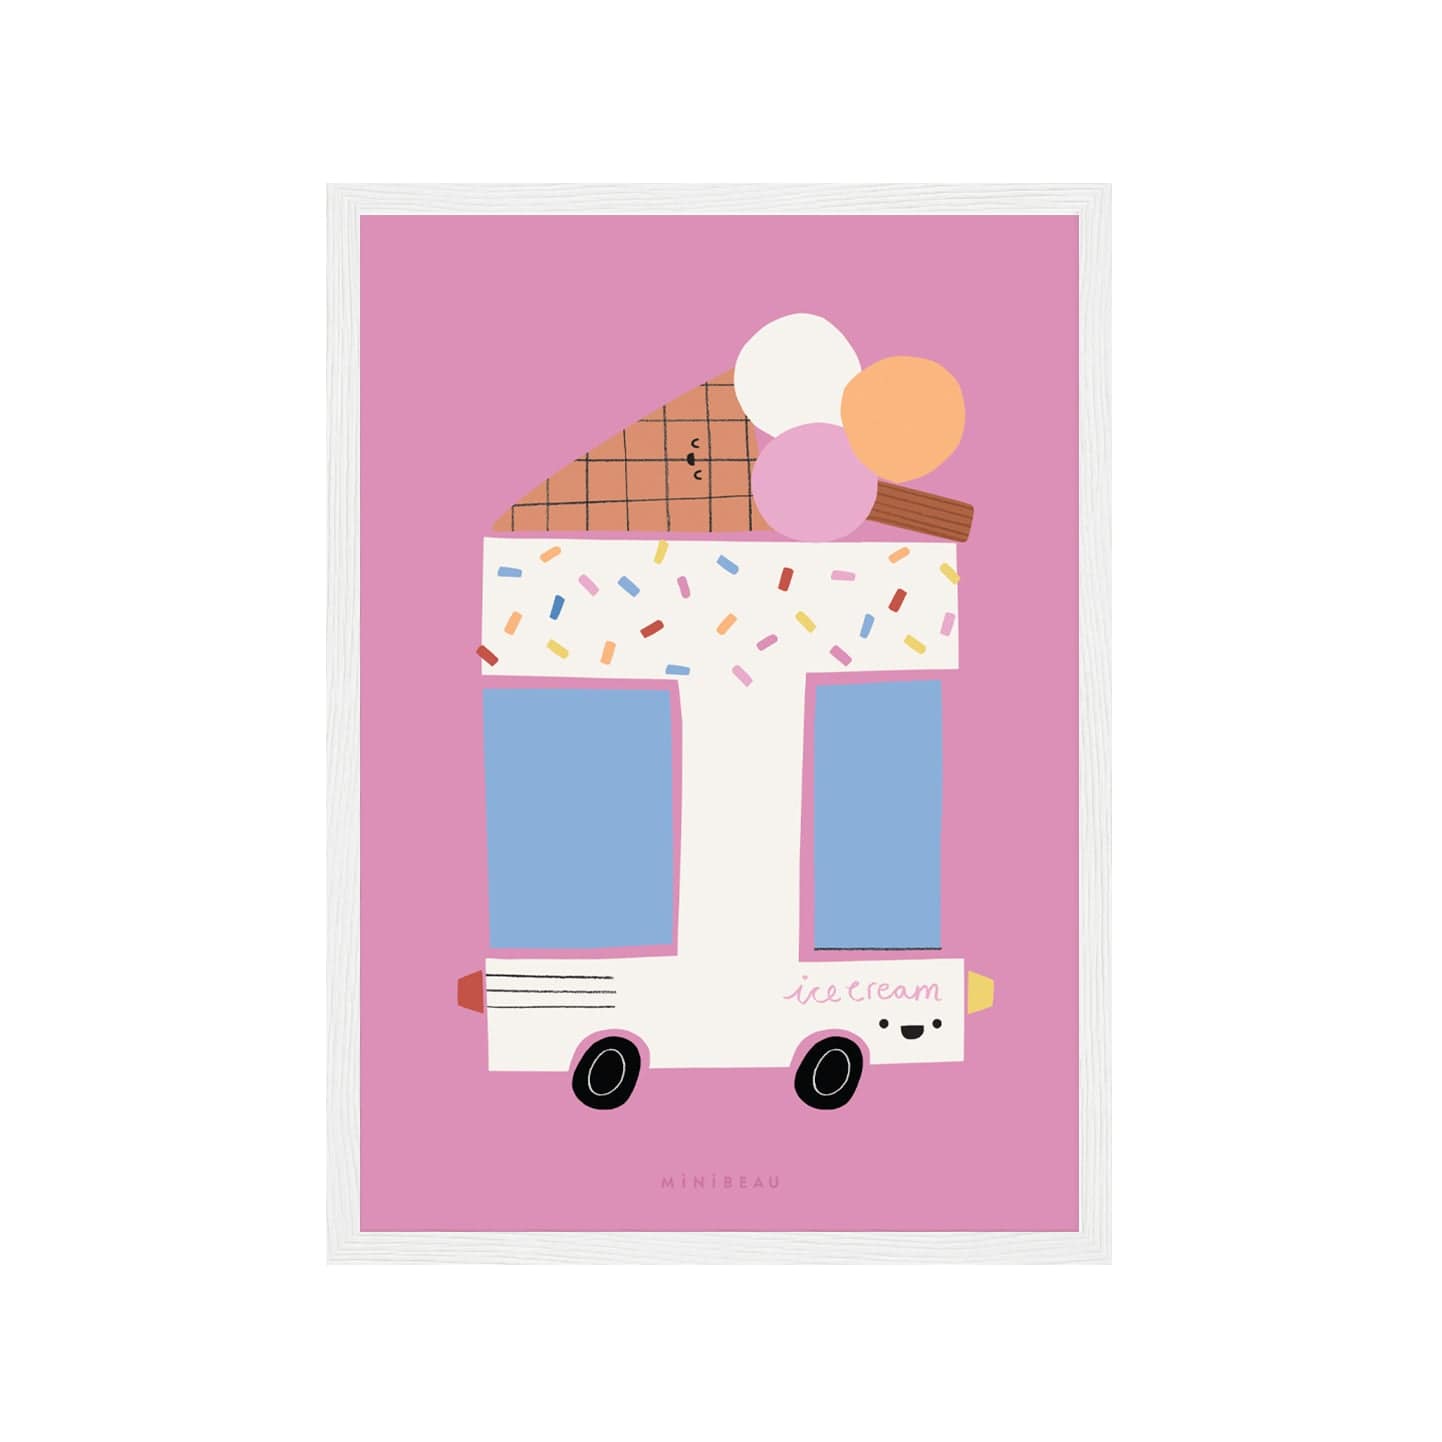 Art print in a white frame. Our Happy Alphabet 'I' Art Print shows a white Ice Cream Van in the shape of an I with sprinkles at the top, with a giant ice cream cone lying on the top with 3 scoops of ice cream in white light brown and pink with a flake, on a pink background